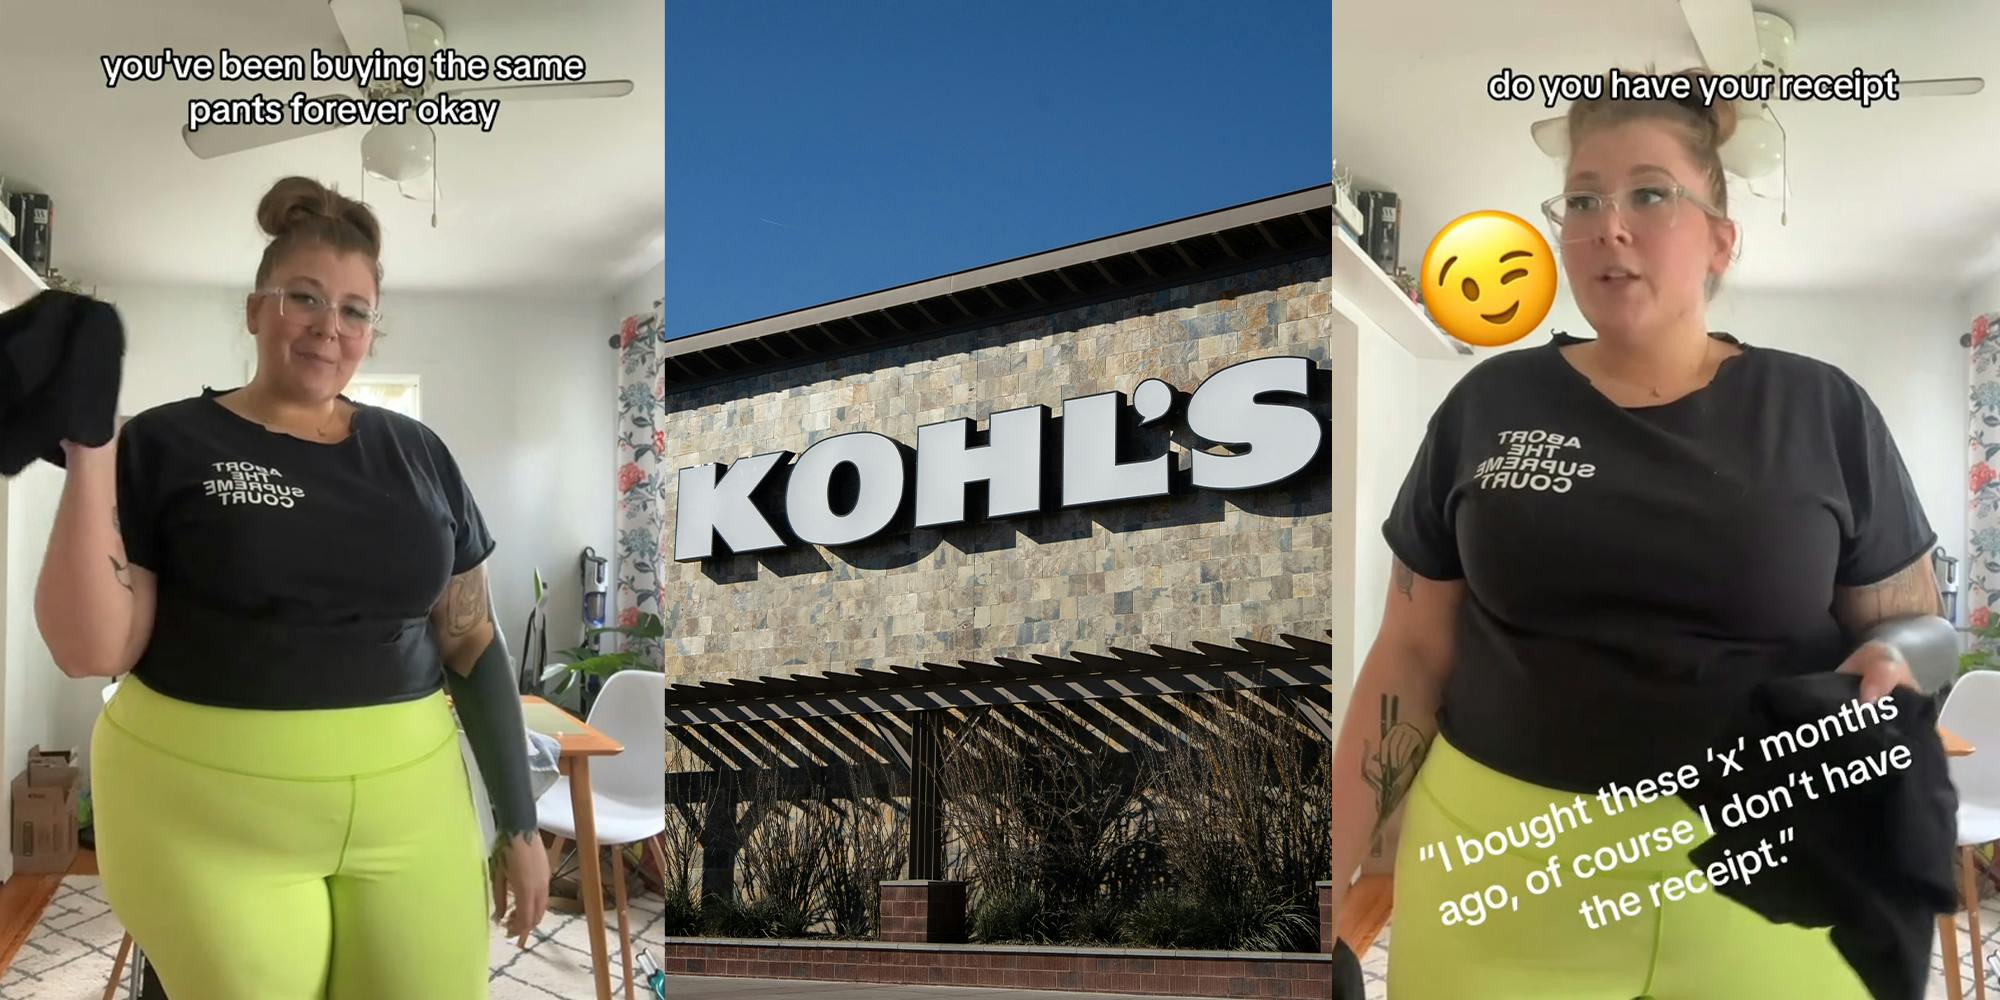 Ex-Kohls worker shares hack to replace old jeans with new ones for free